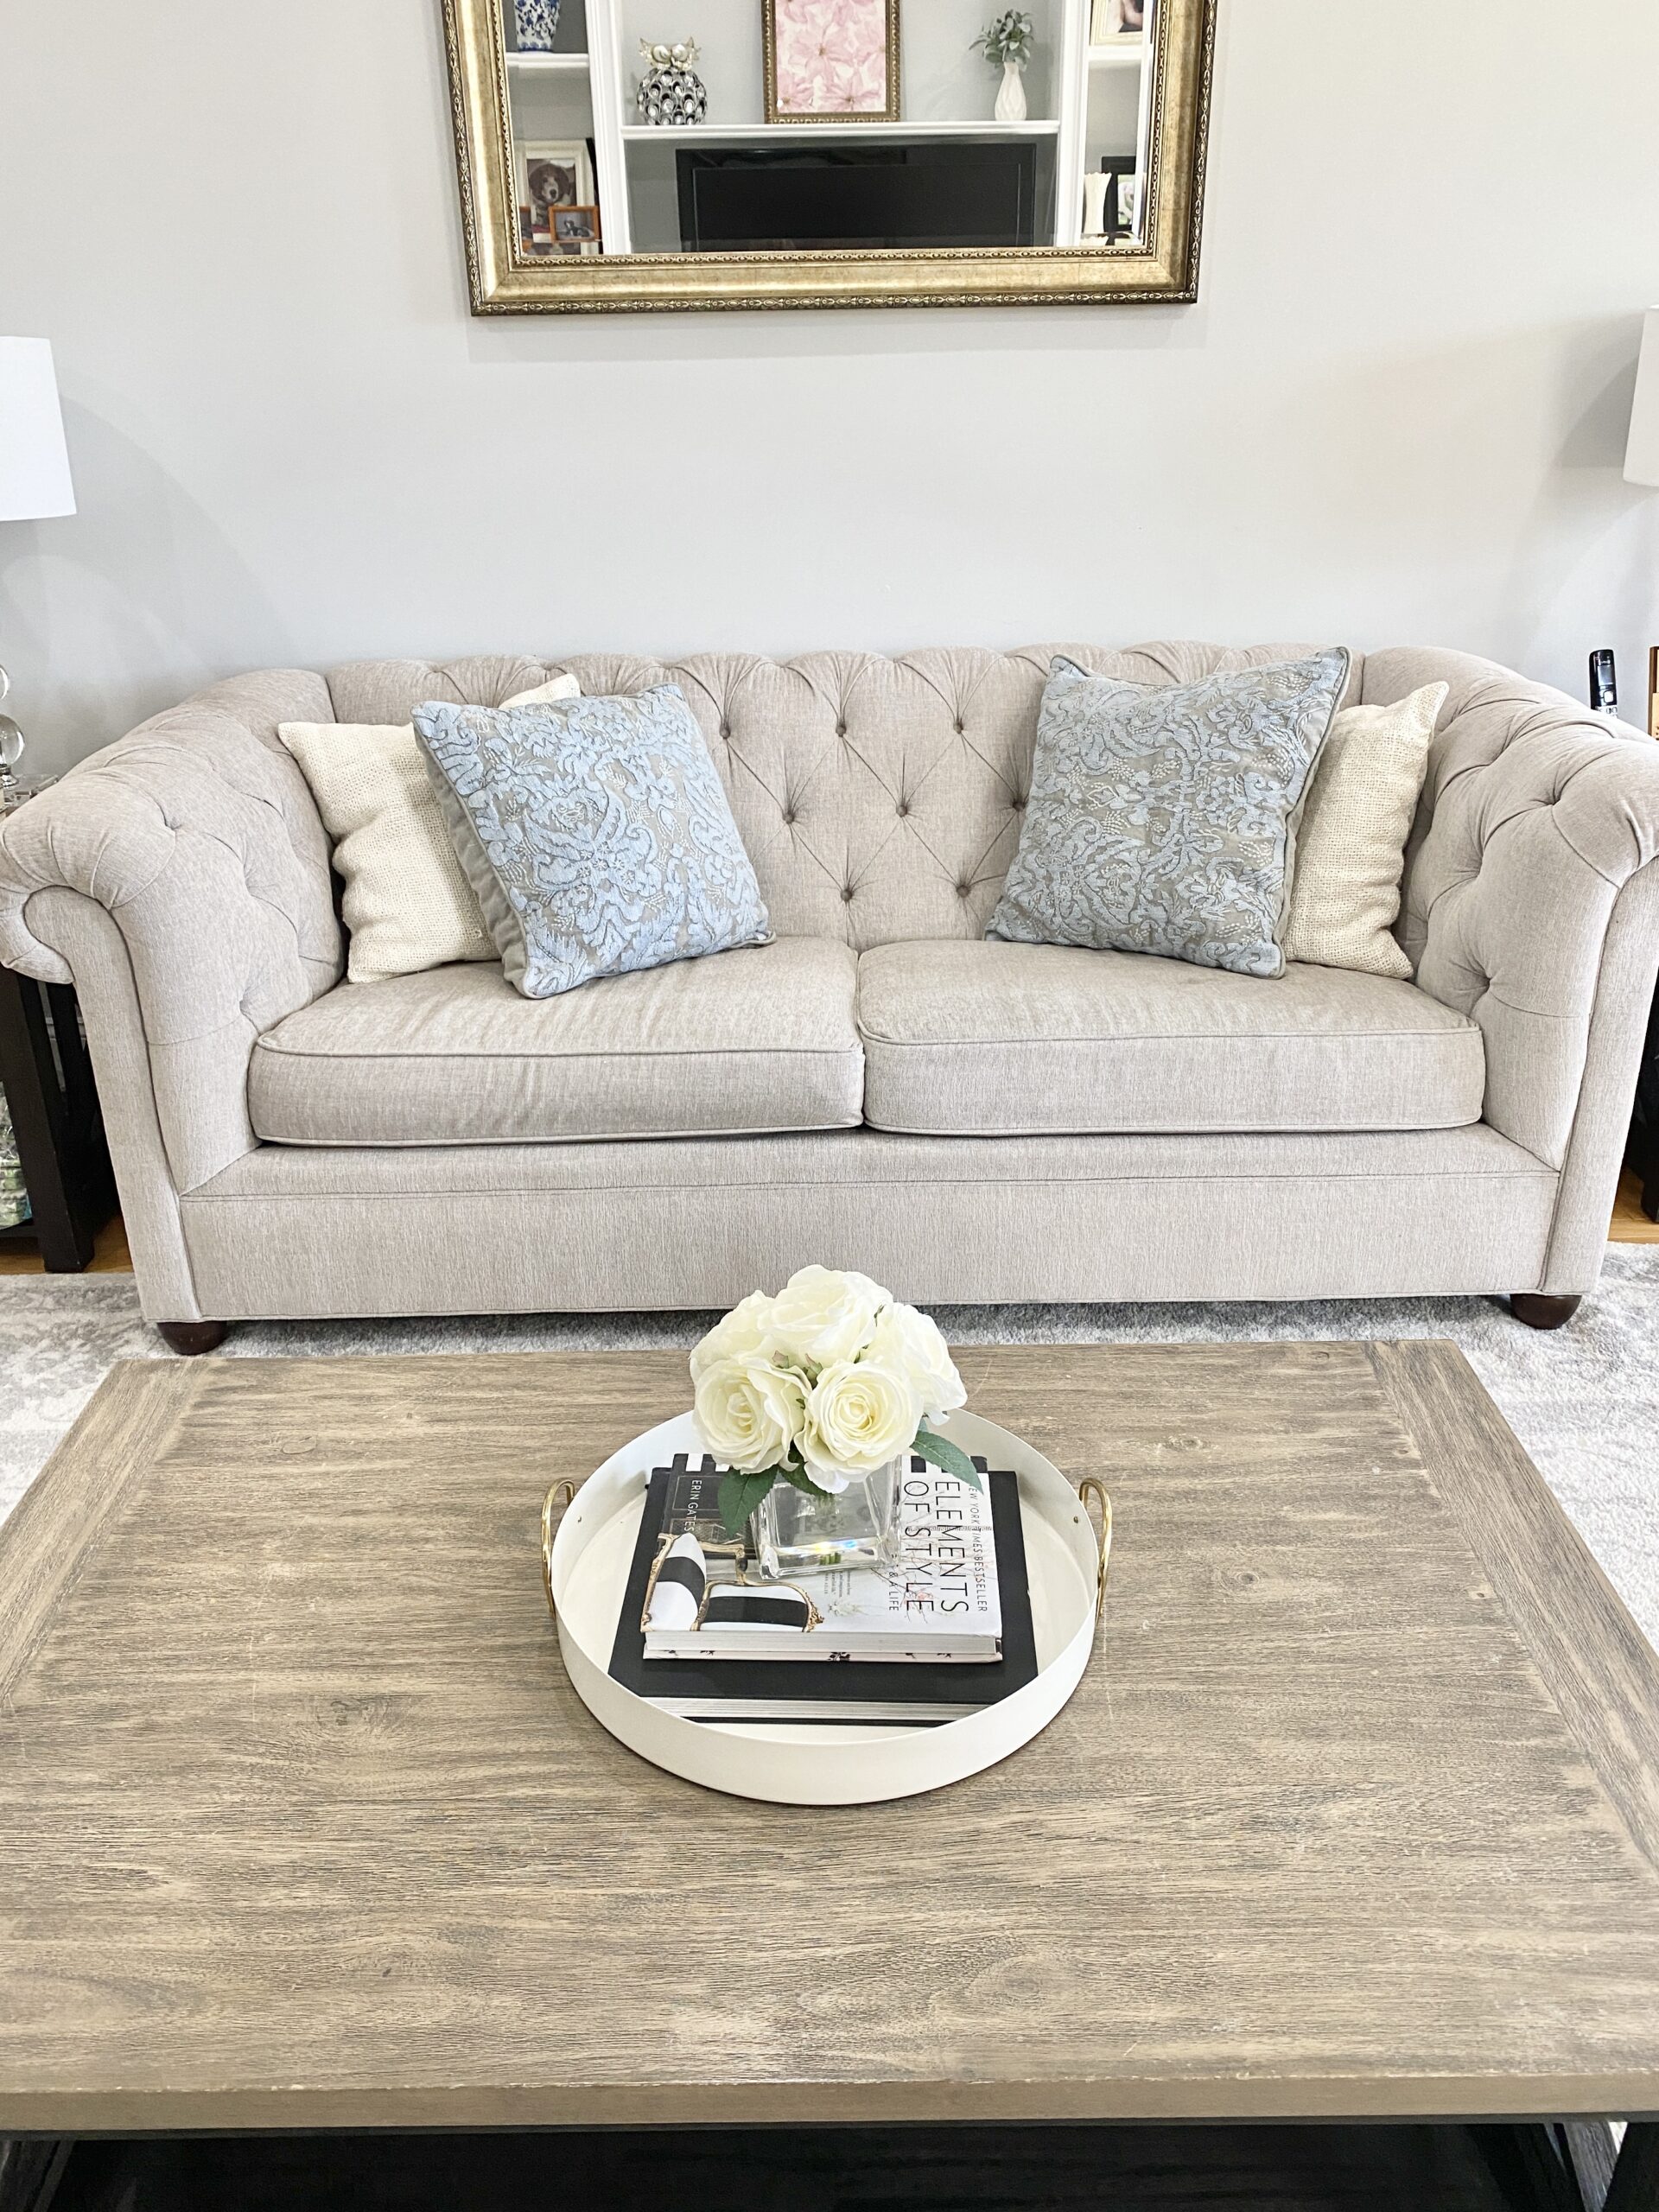 Pottery Barn Chesterfield Sofa Review